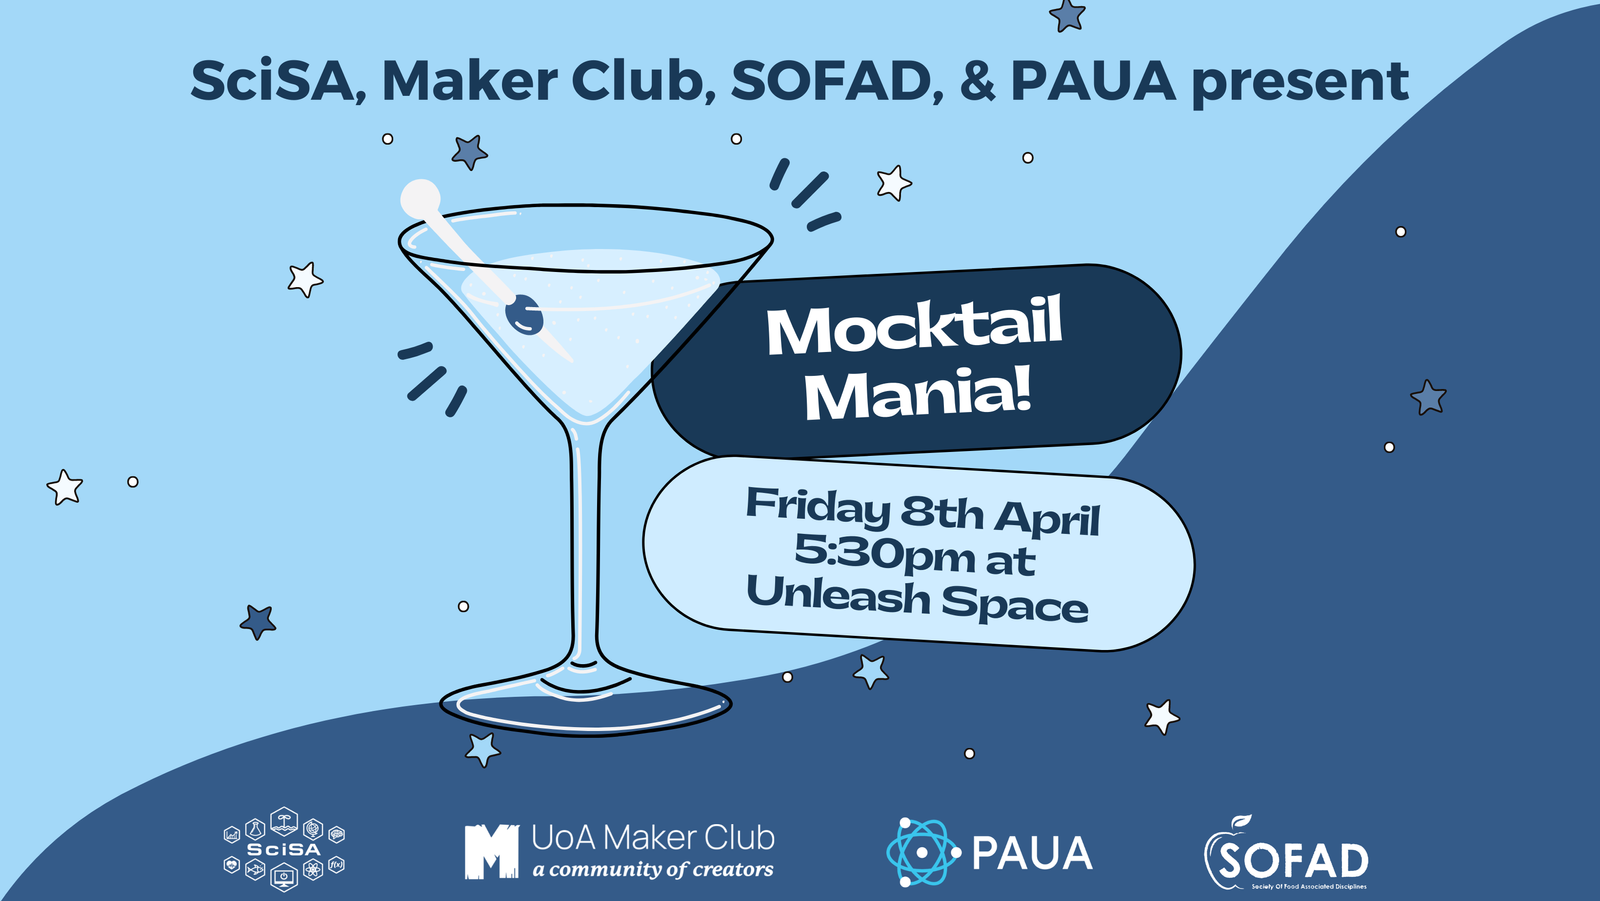 Friday the 8th: Mocktail Mania